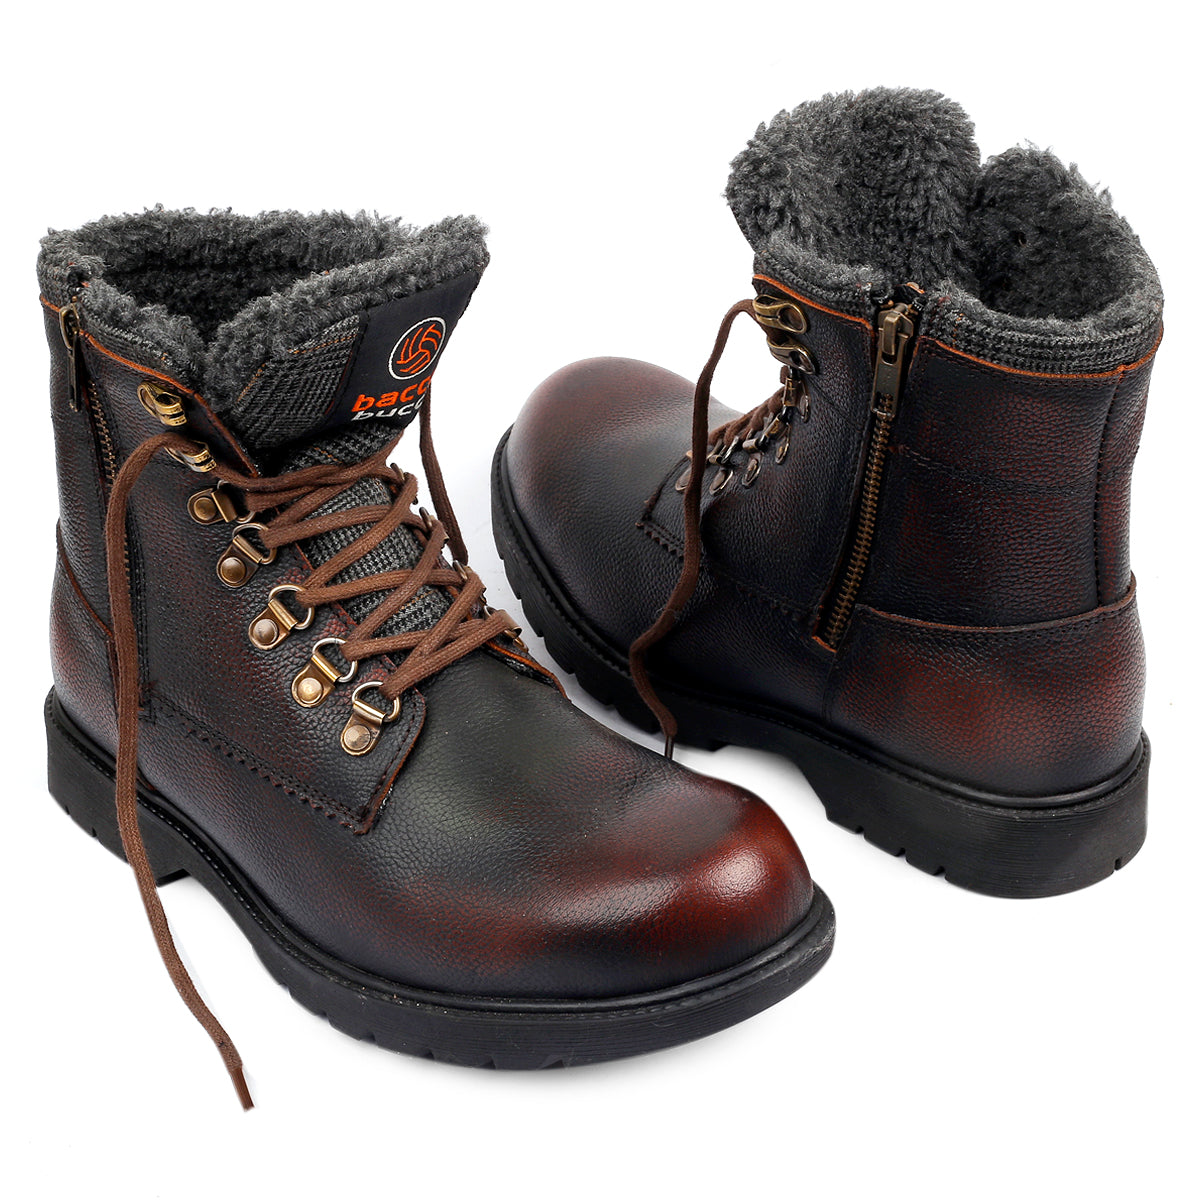 waterproof boots for men, mens snow boots, high ankle boots, genuine leather boots